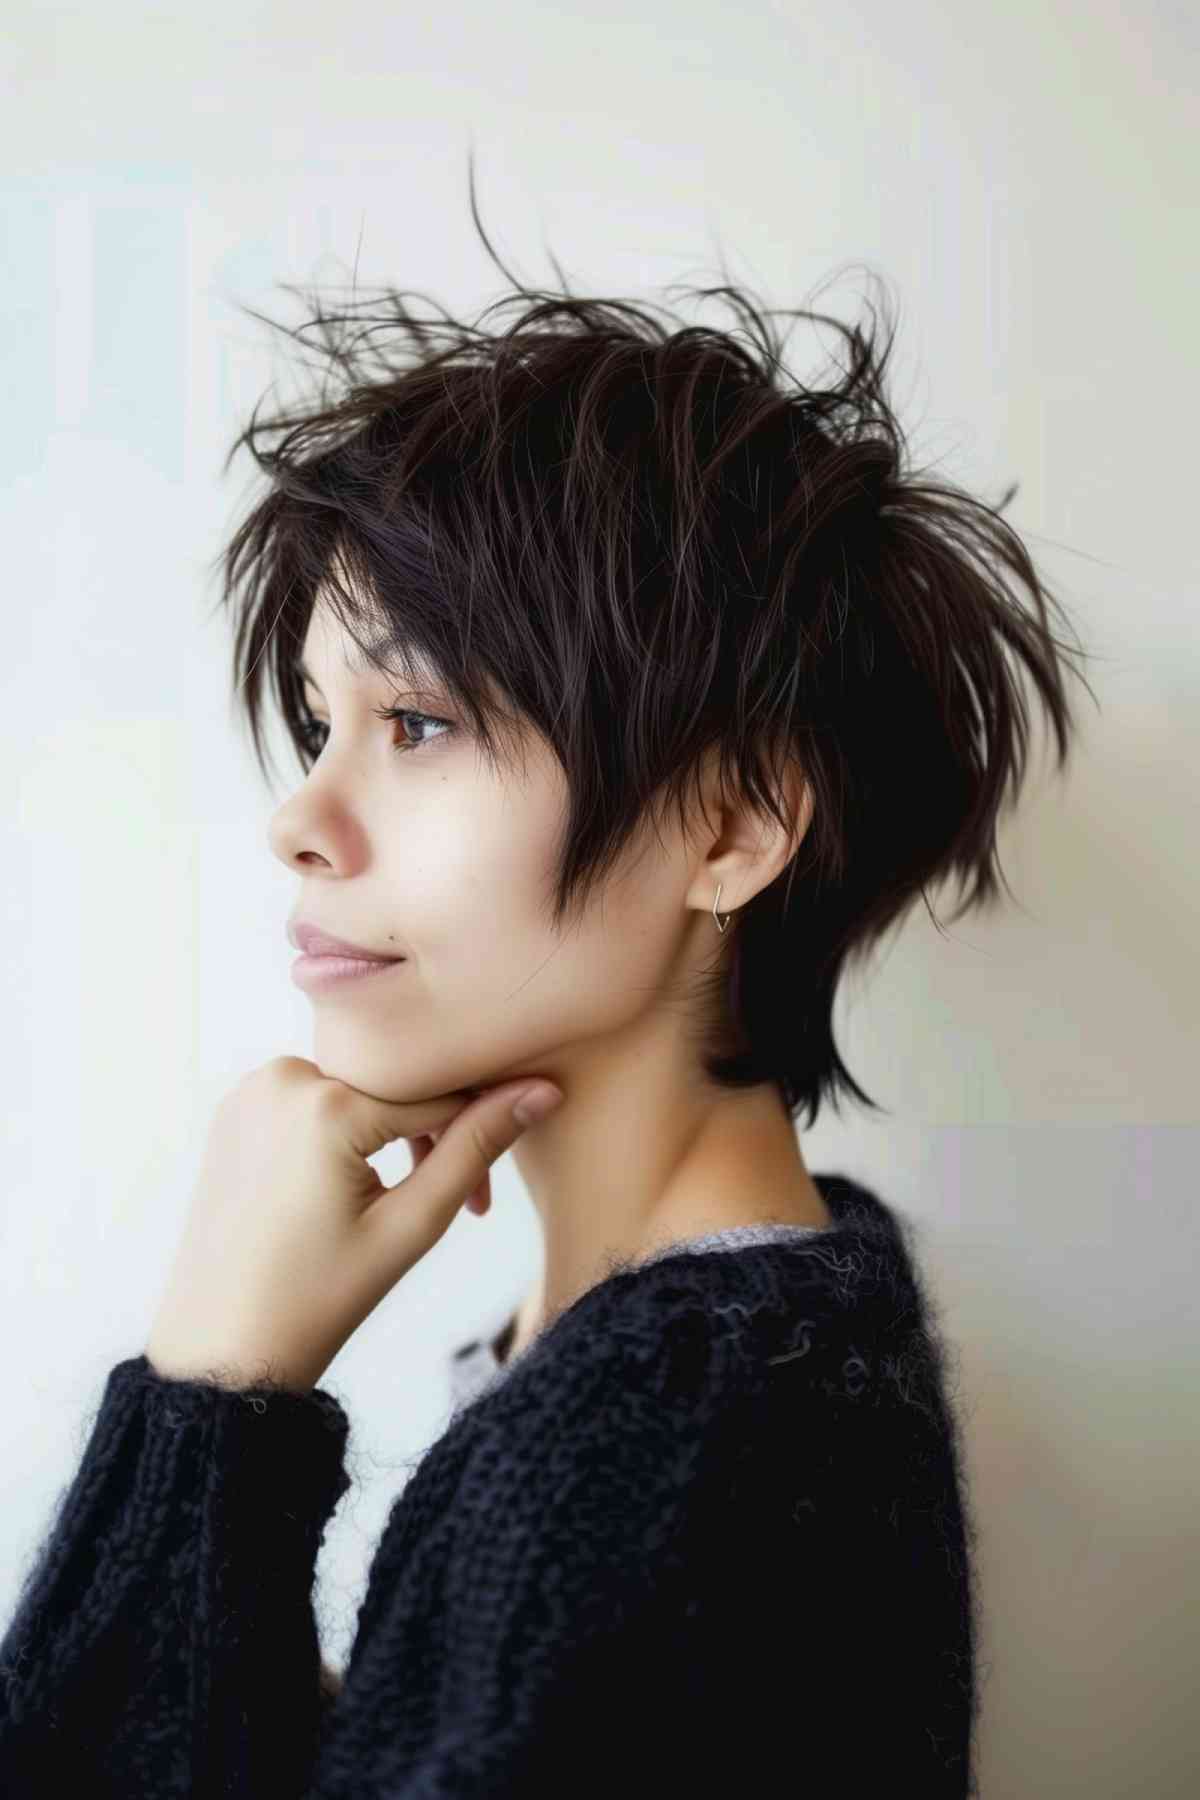 Short tousled layered hairstyle for a heart-shaped face with a thoughtful expression